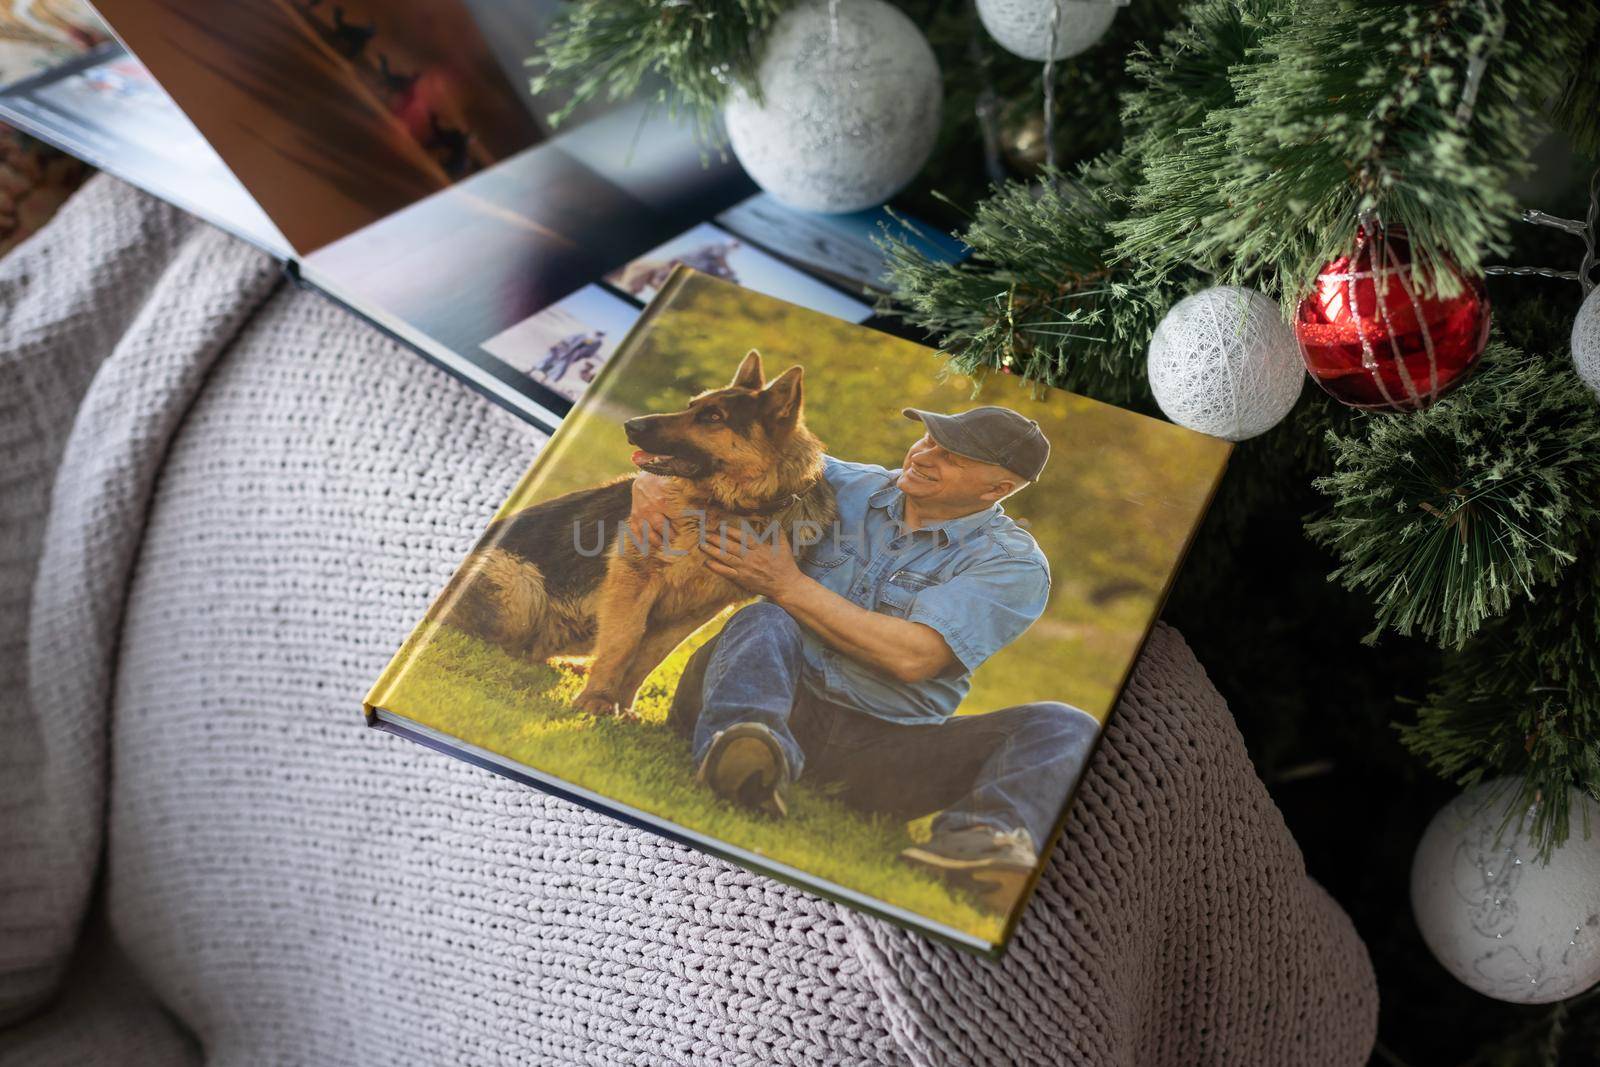 photo book about traveling near the Christmas tree by Andelov13